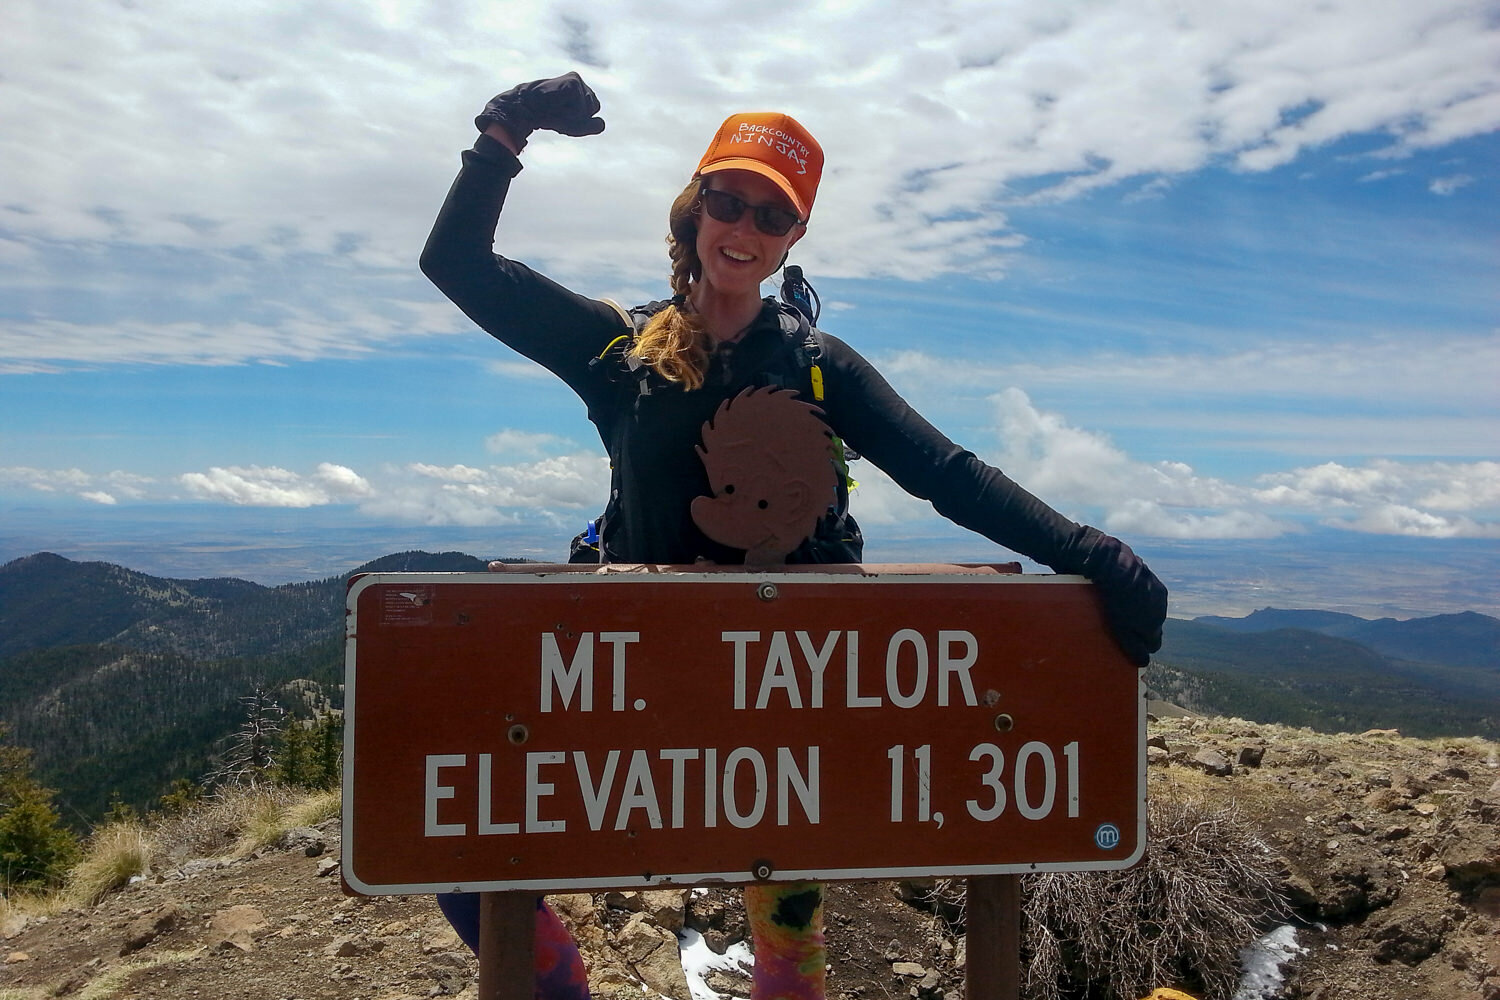 Celebrating at the top of Mt. Taylor in New Mexico